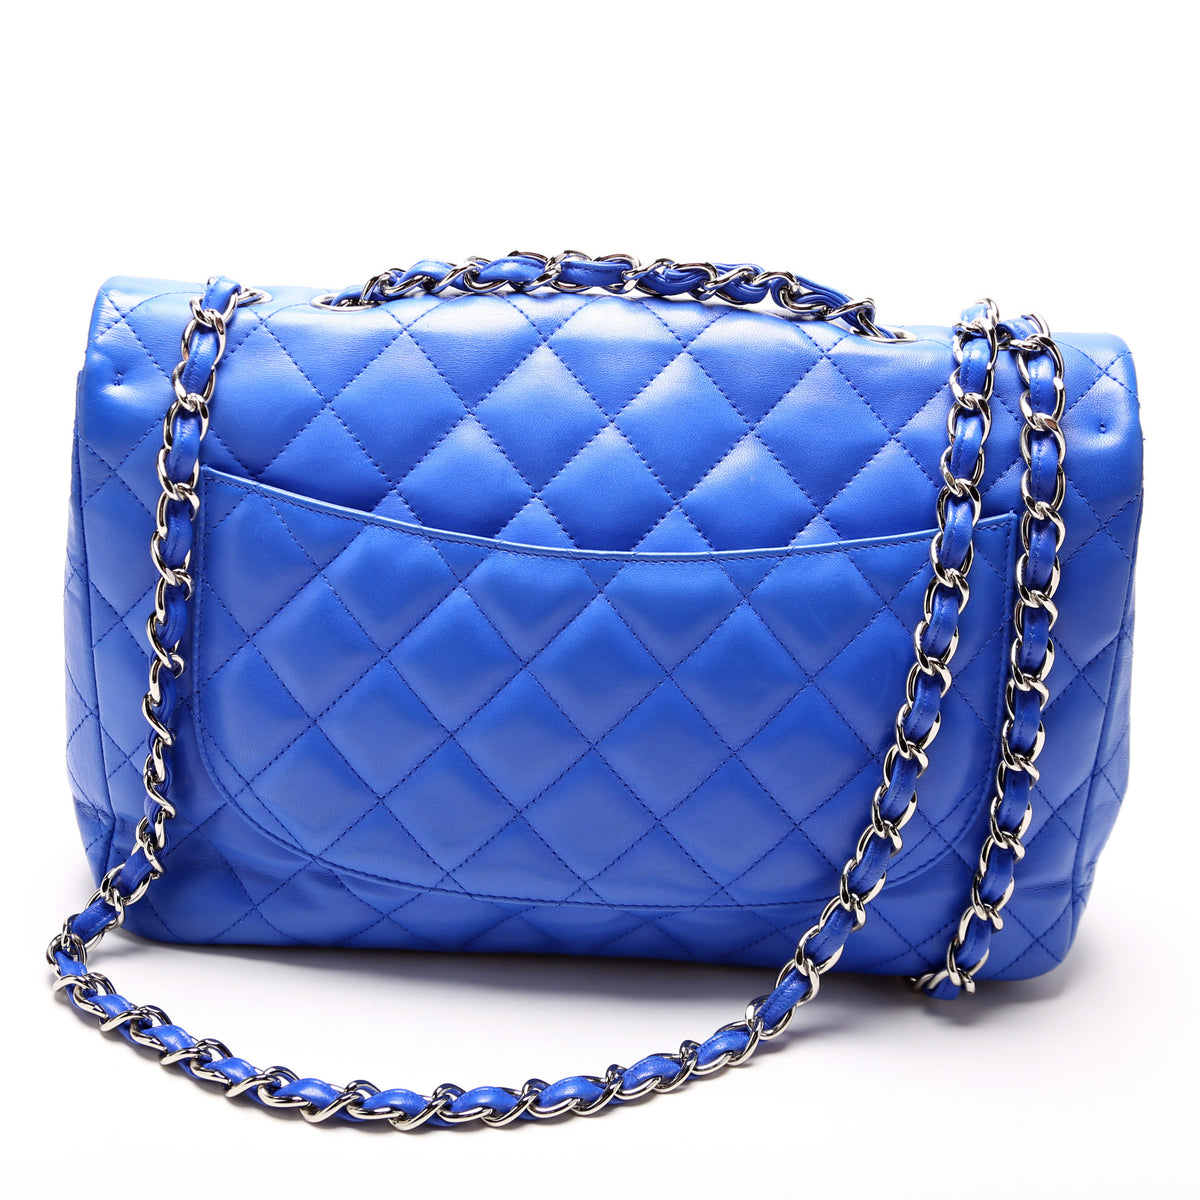 Timeless/classique leather handbag Chanel Blue in Leather - 34564244